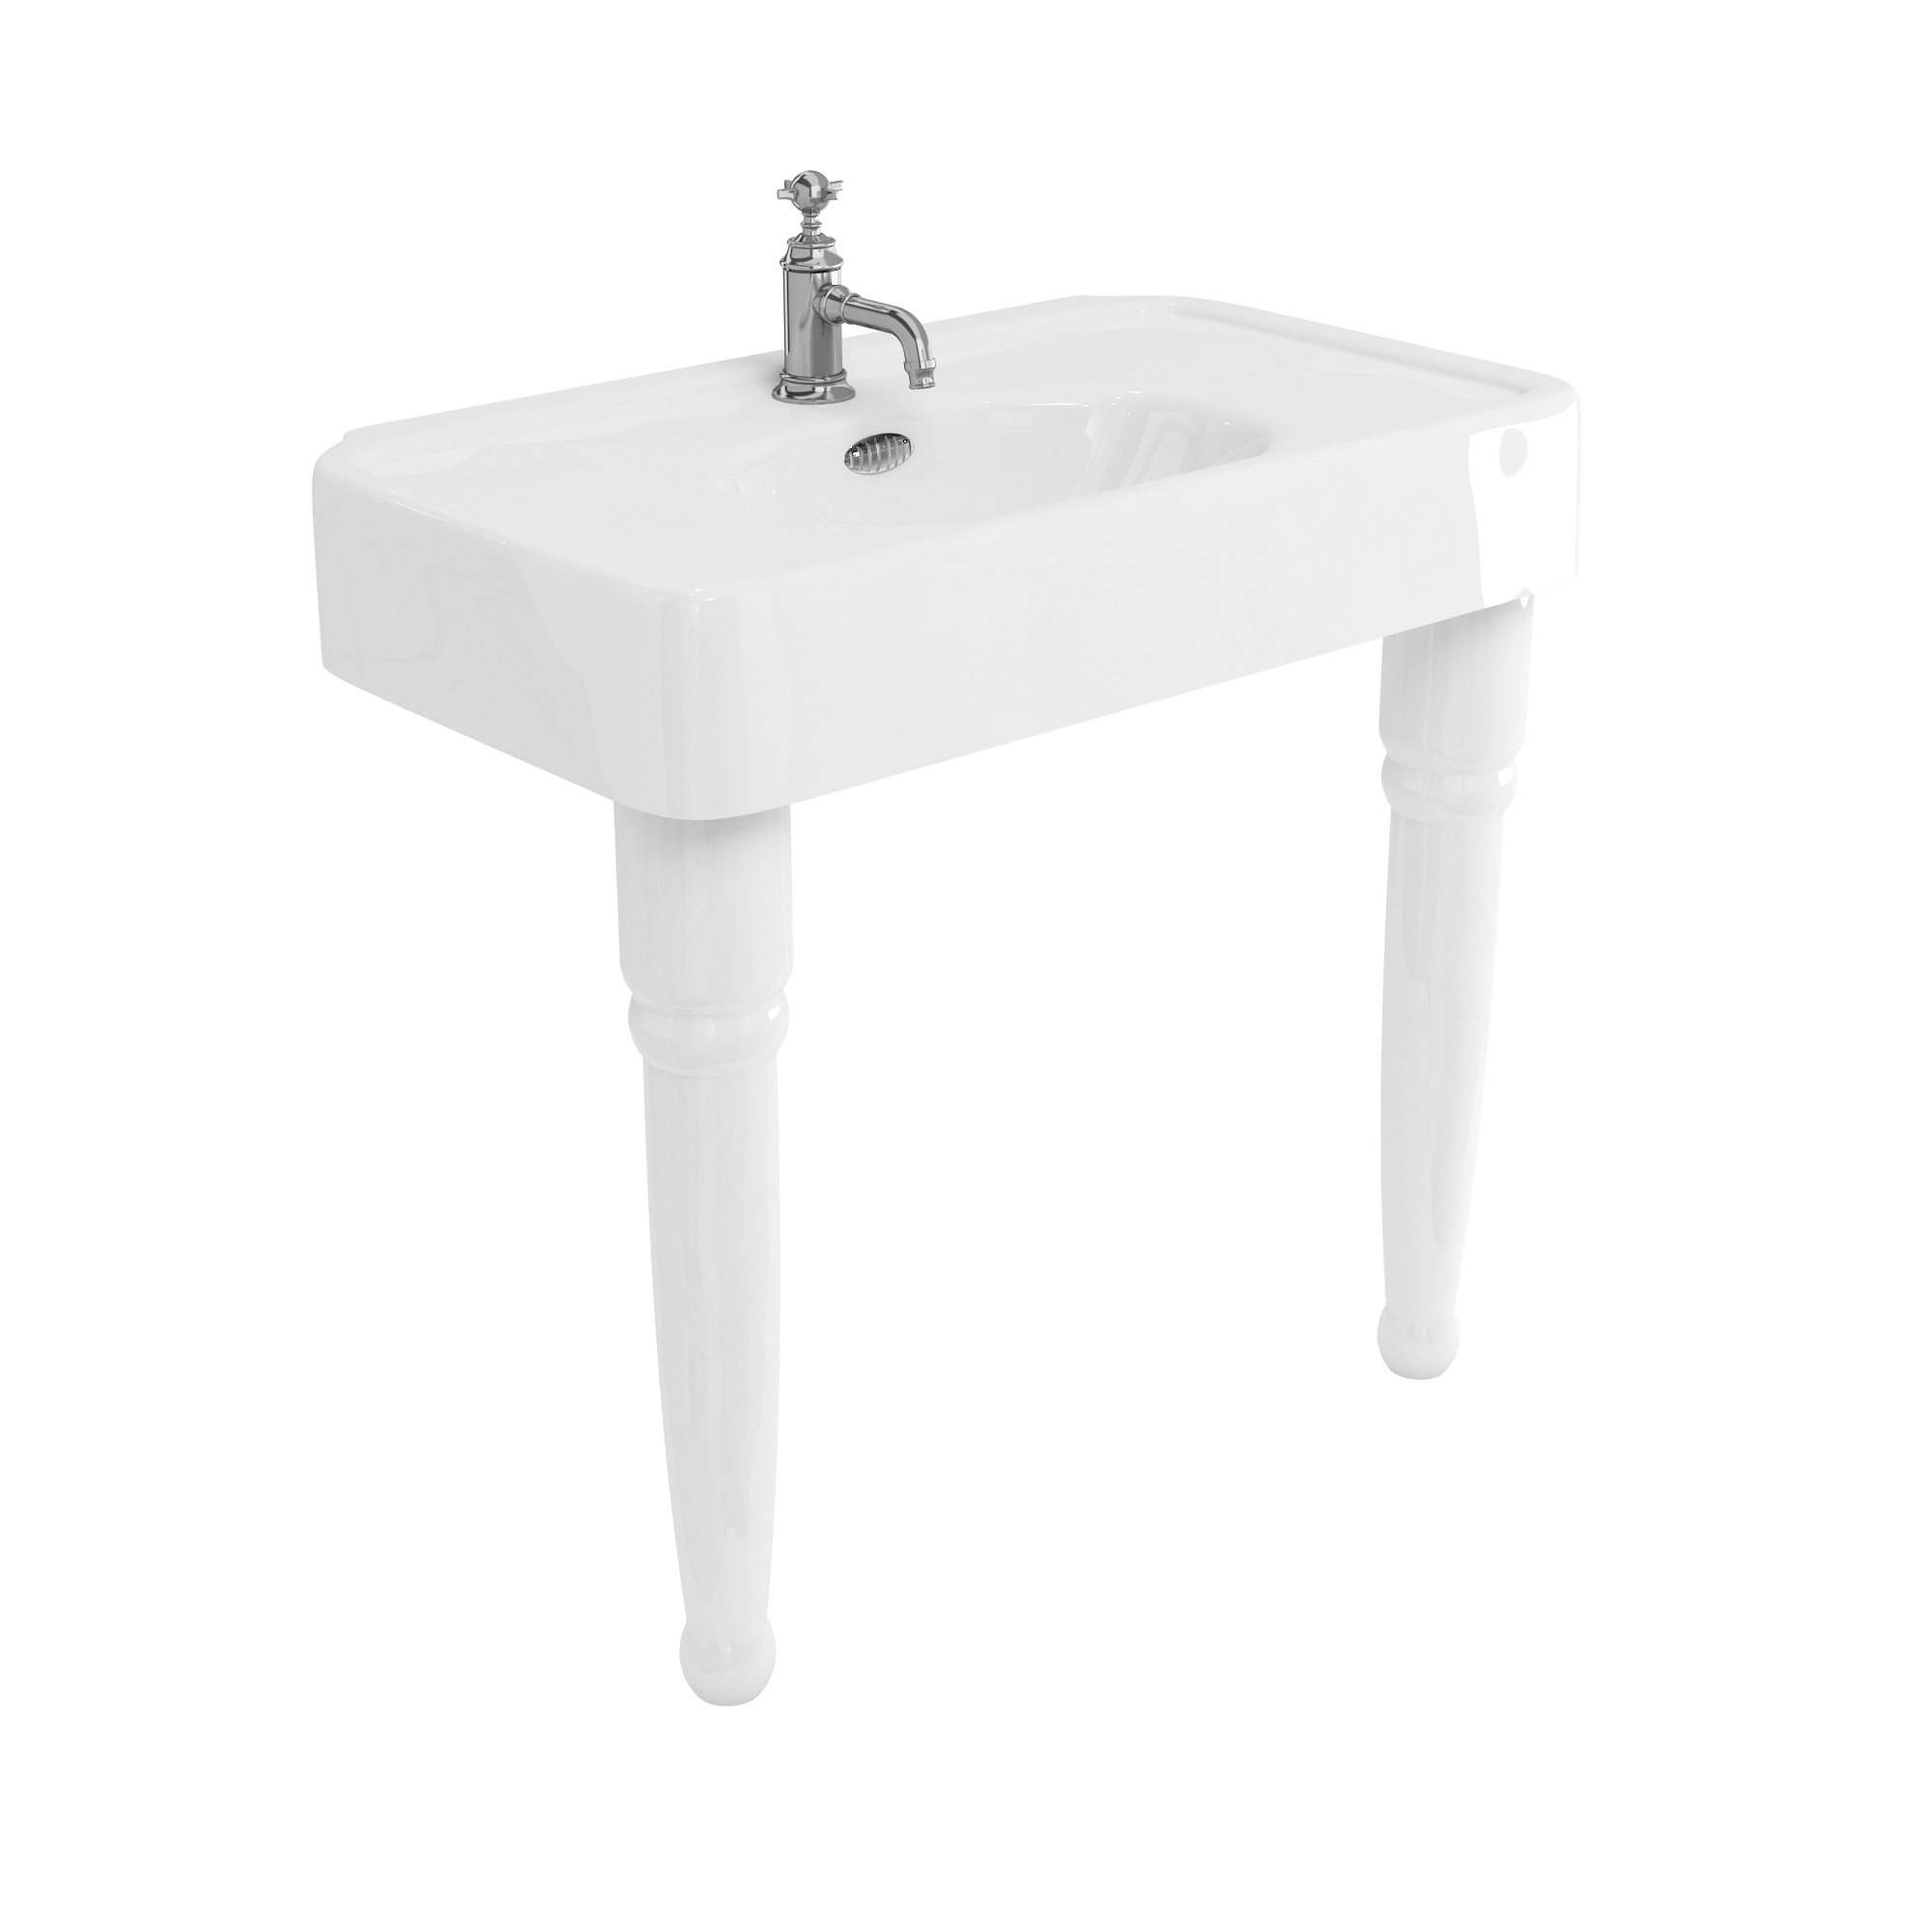 Arcade 900mm basin with chrome overflow & ceramic console legs